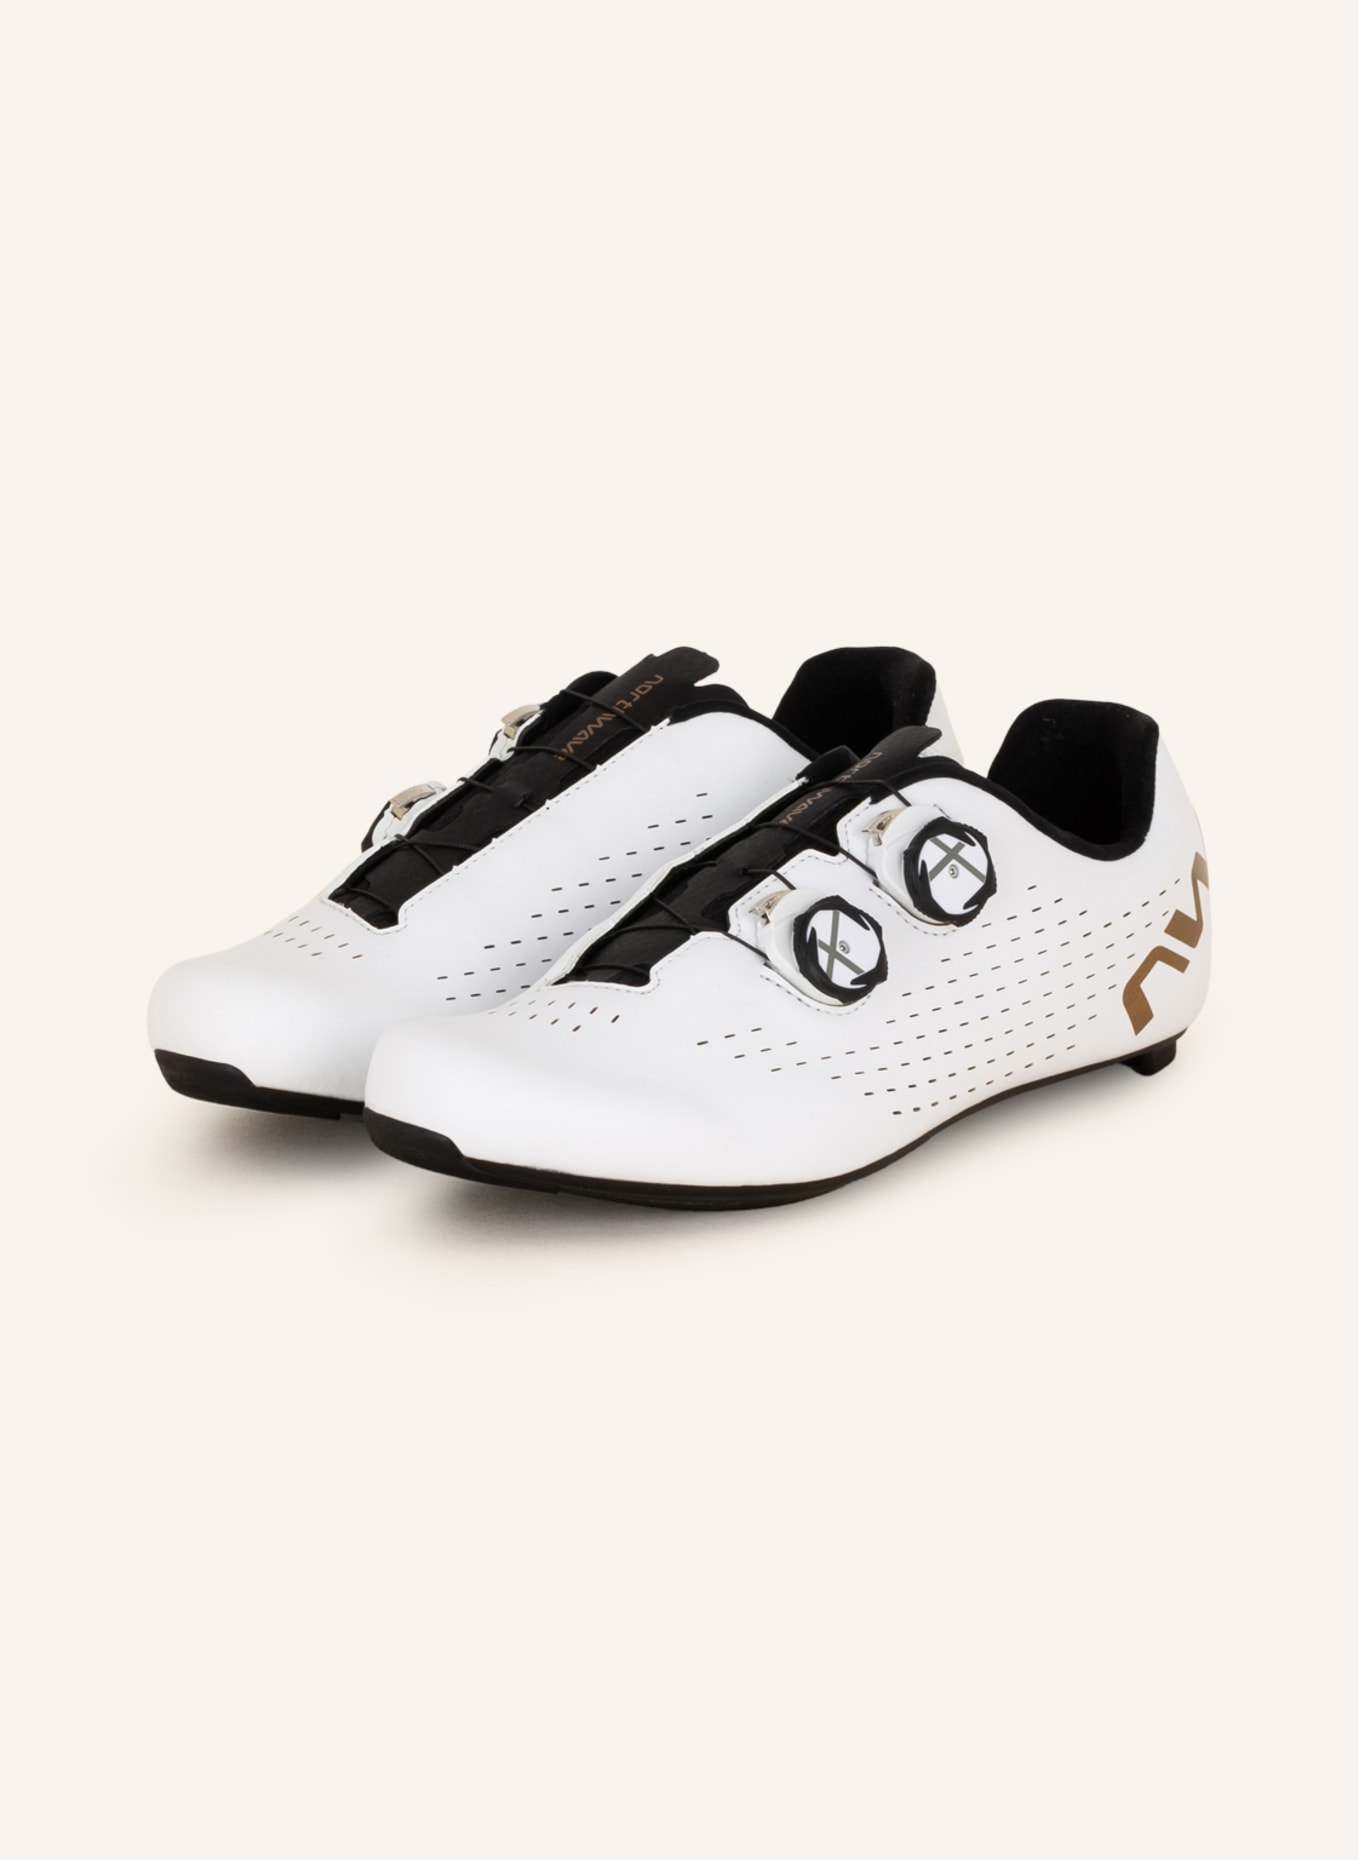 northwave Road bike shoes REVOLUTION in white